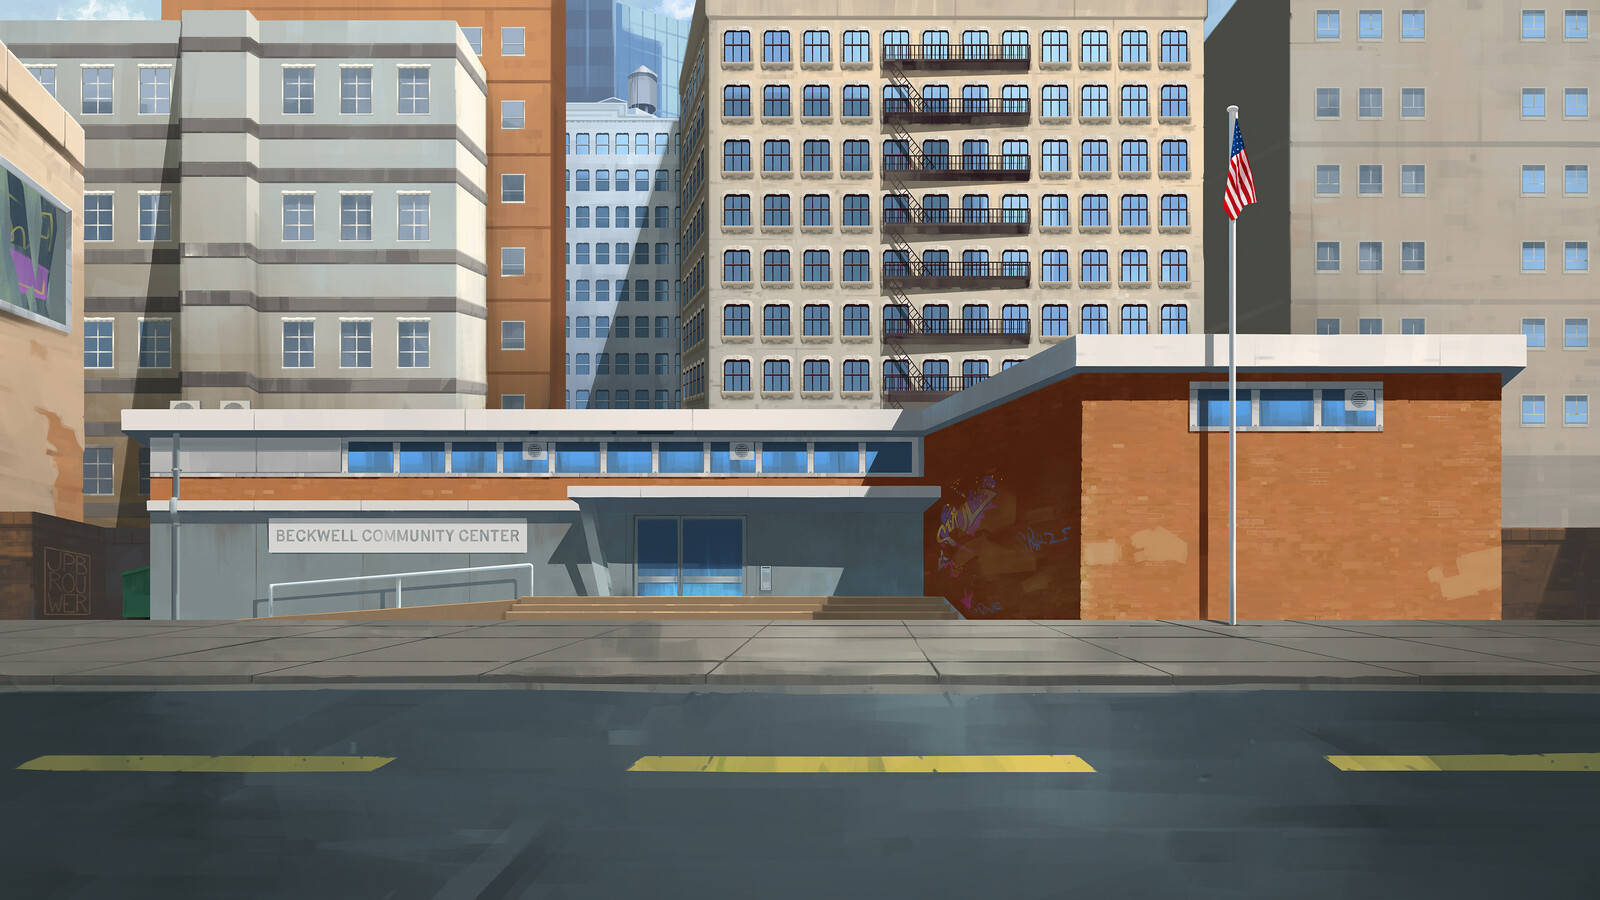 BG painting test for "Invincible" animated series.